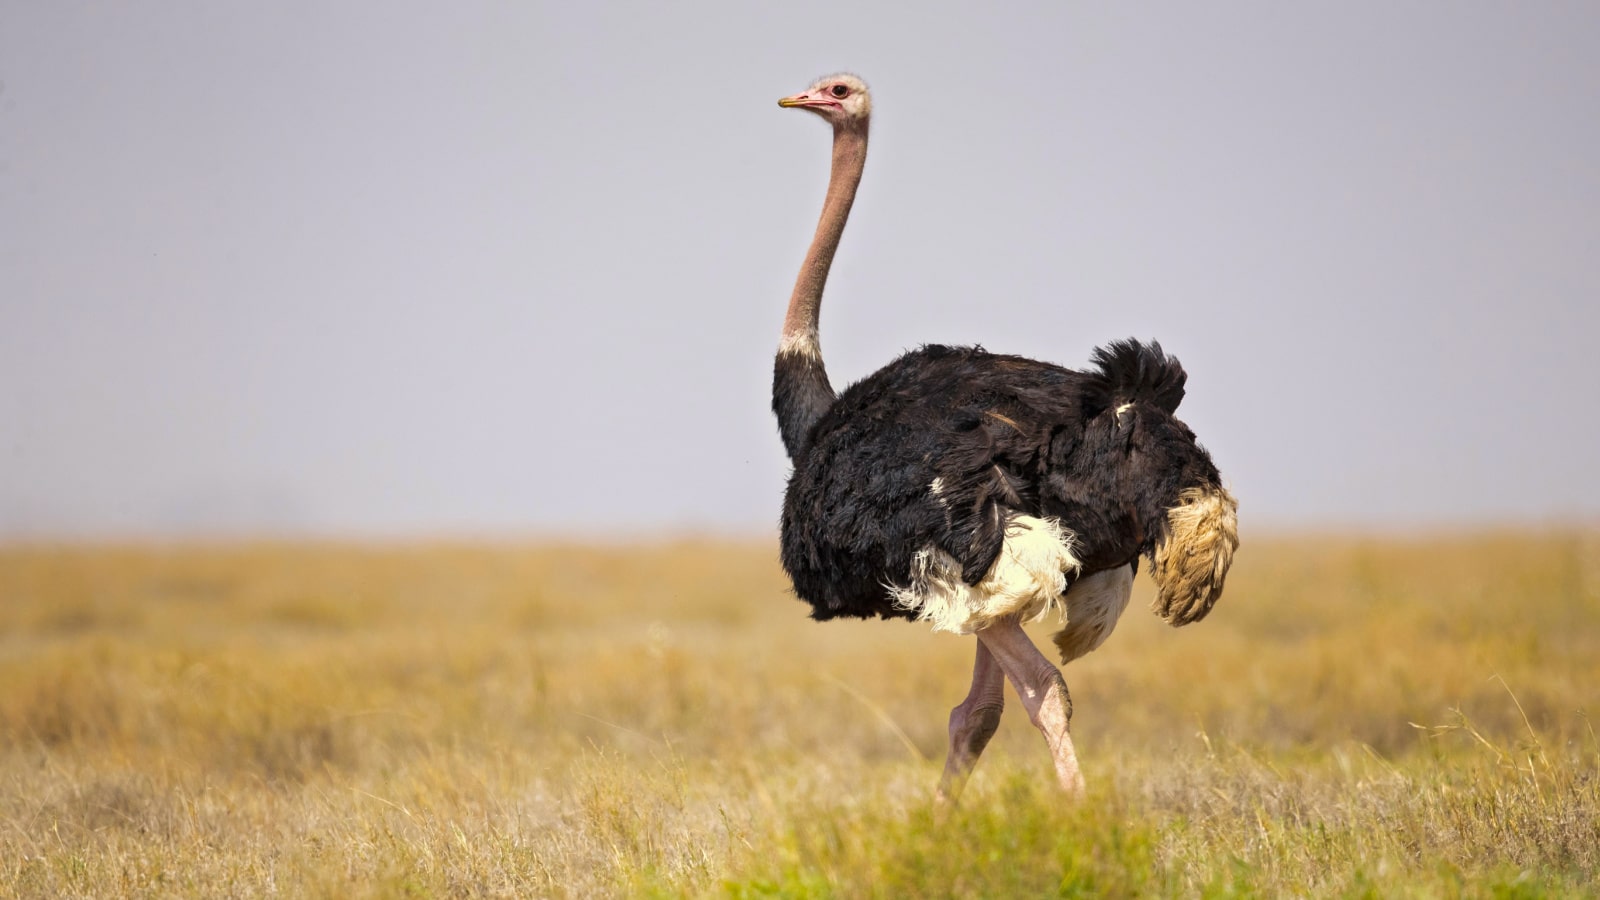 <p>The most giant and flightless bird there is, African Safari offers you exclusive interactions with these farmed animals. As if made of pure intrigues, the Ostrich has unusual characteristics, like keeping their eggs with the most dominant Ostrich in the group, and you should ask to see them on your next visit.</p>